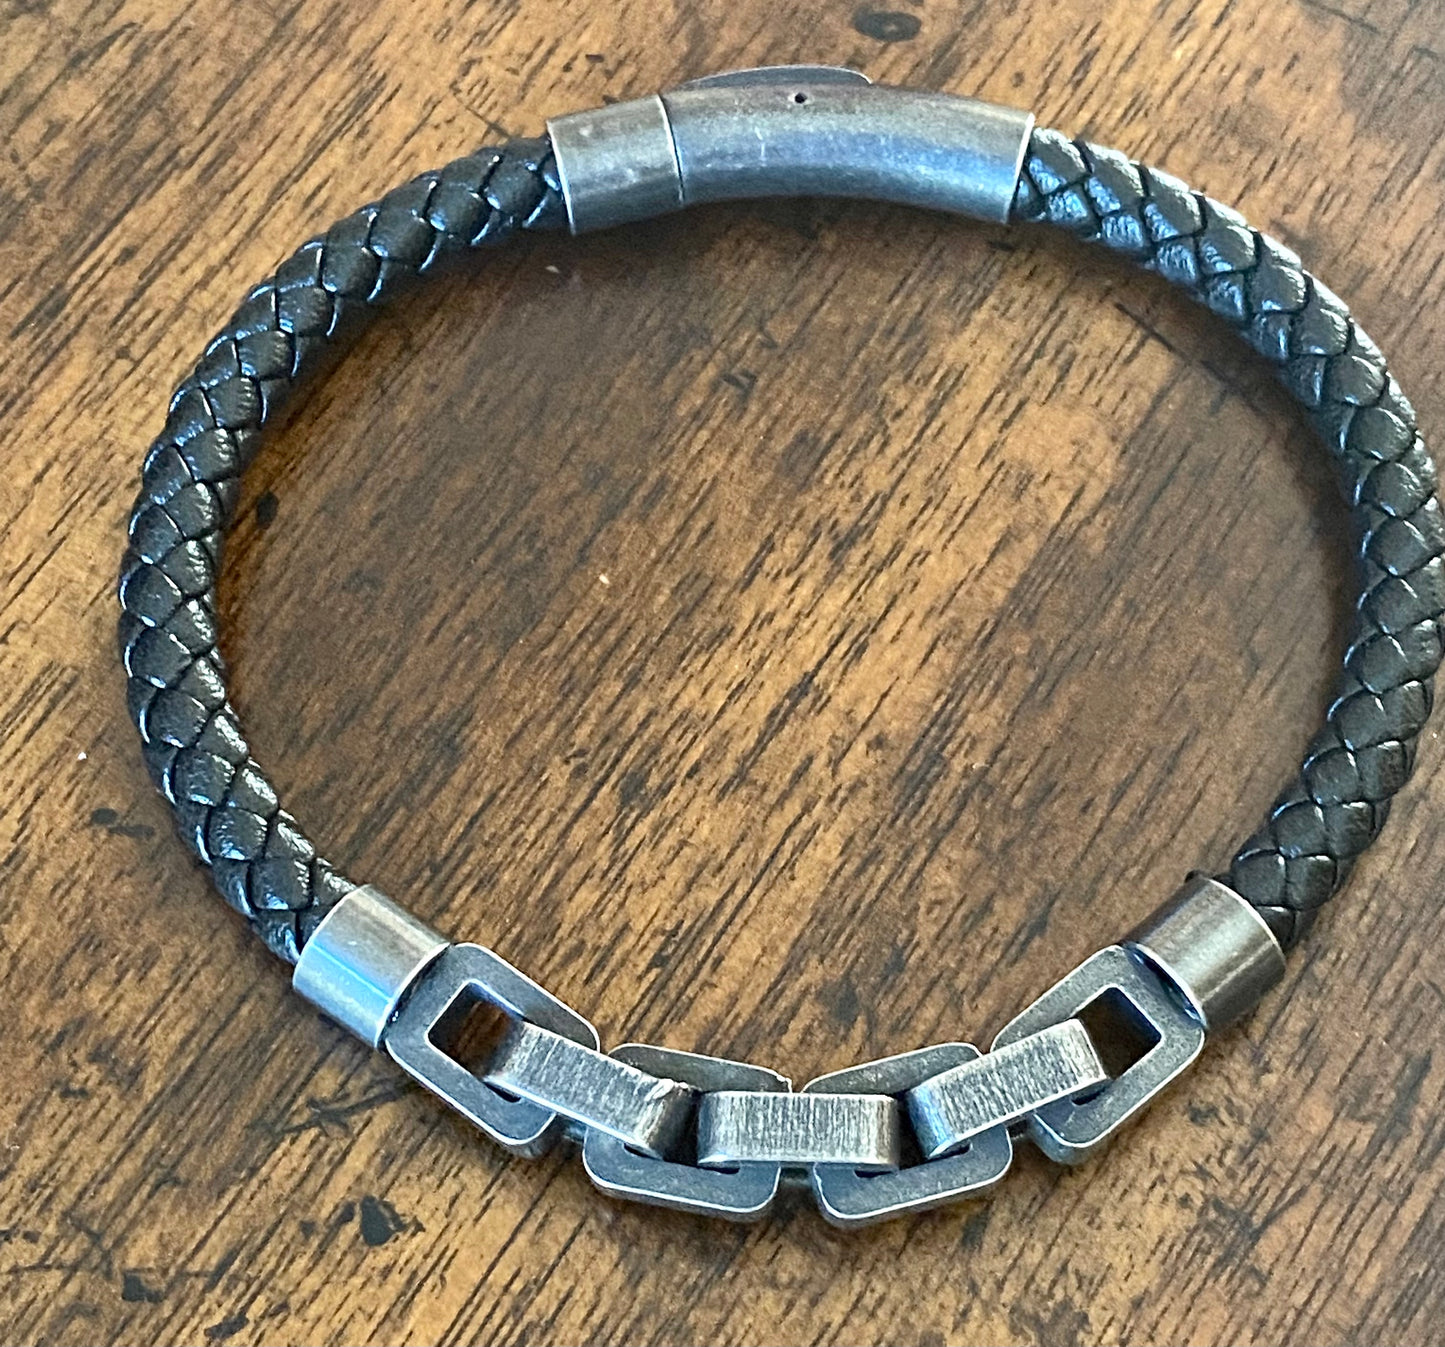 Men's Nappa Leather Bracelet with Stainless Steel Chain Link Accent